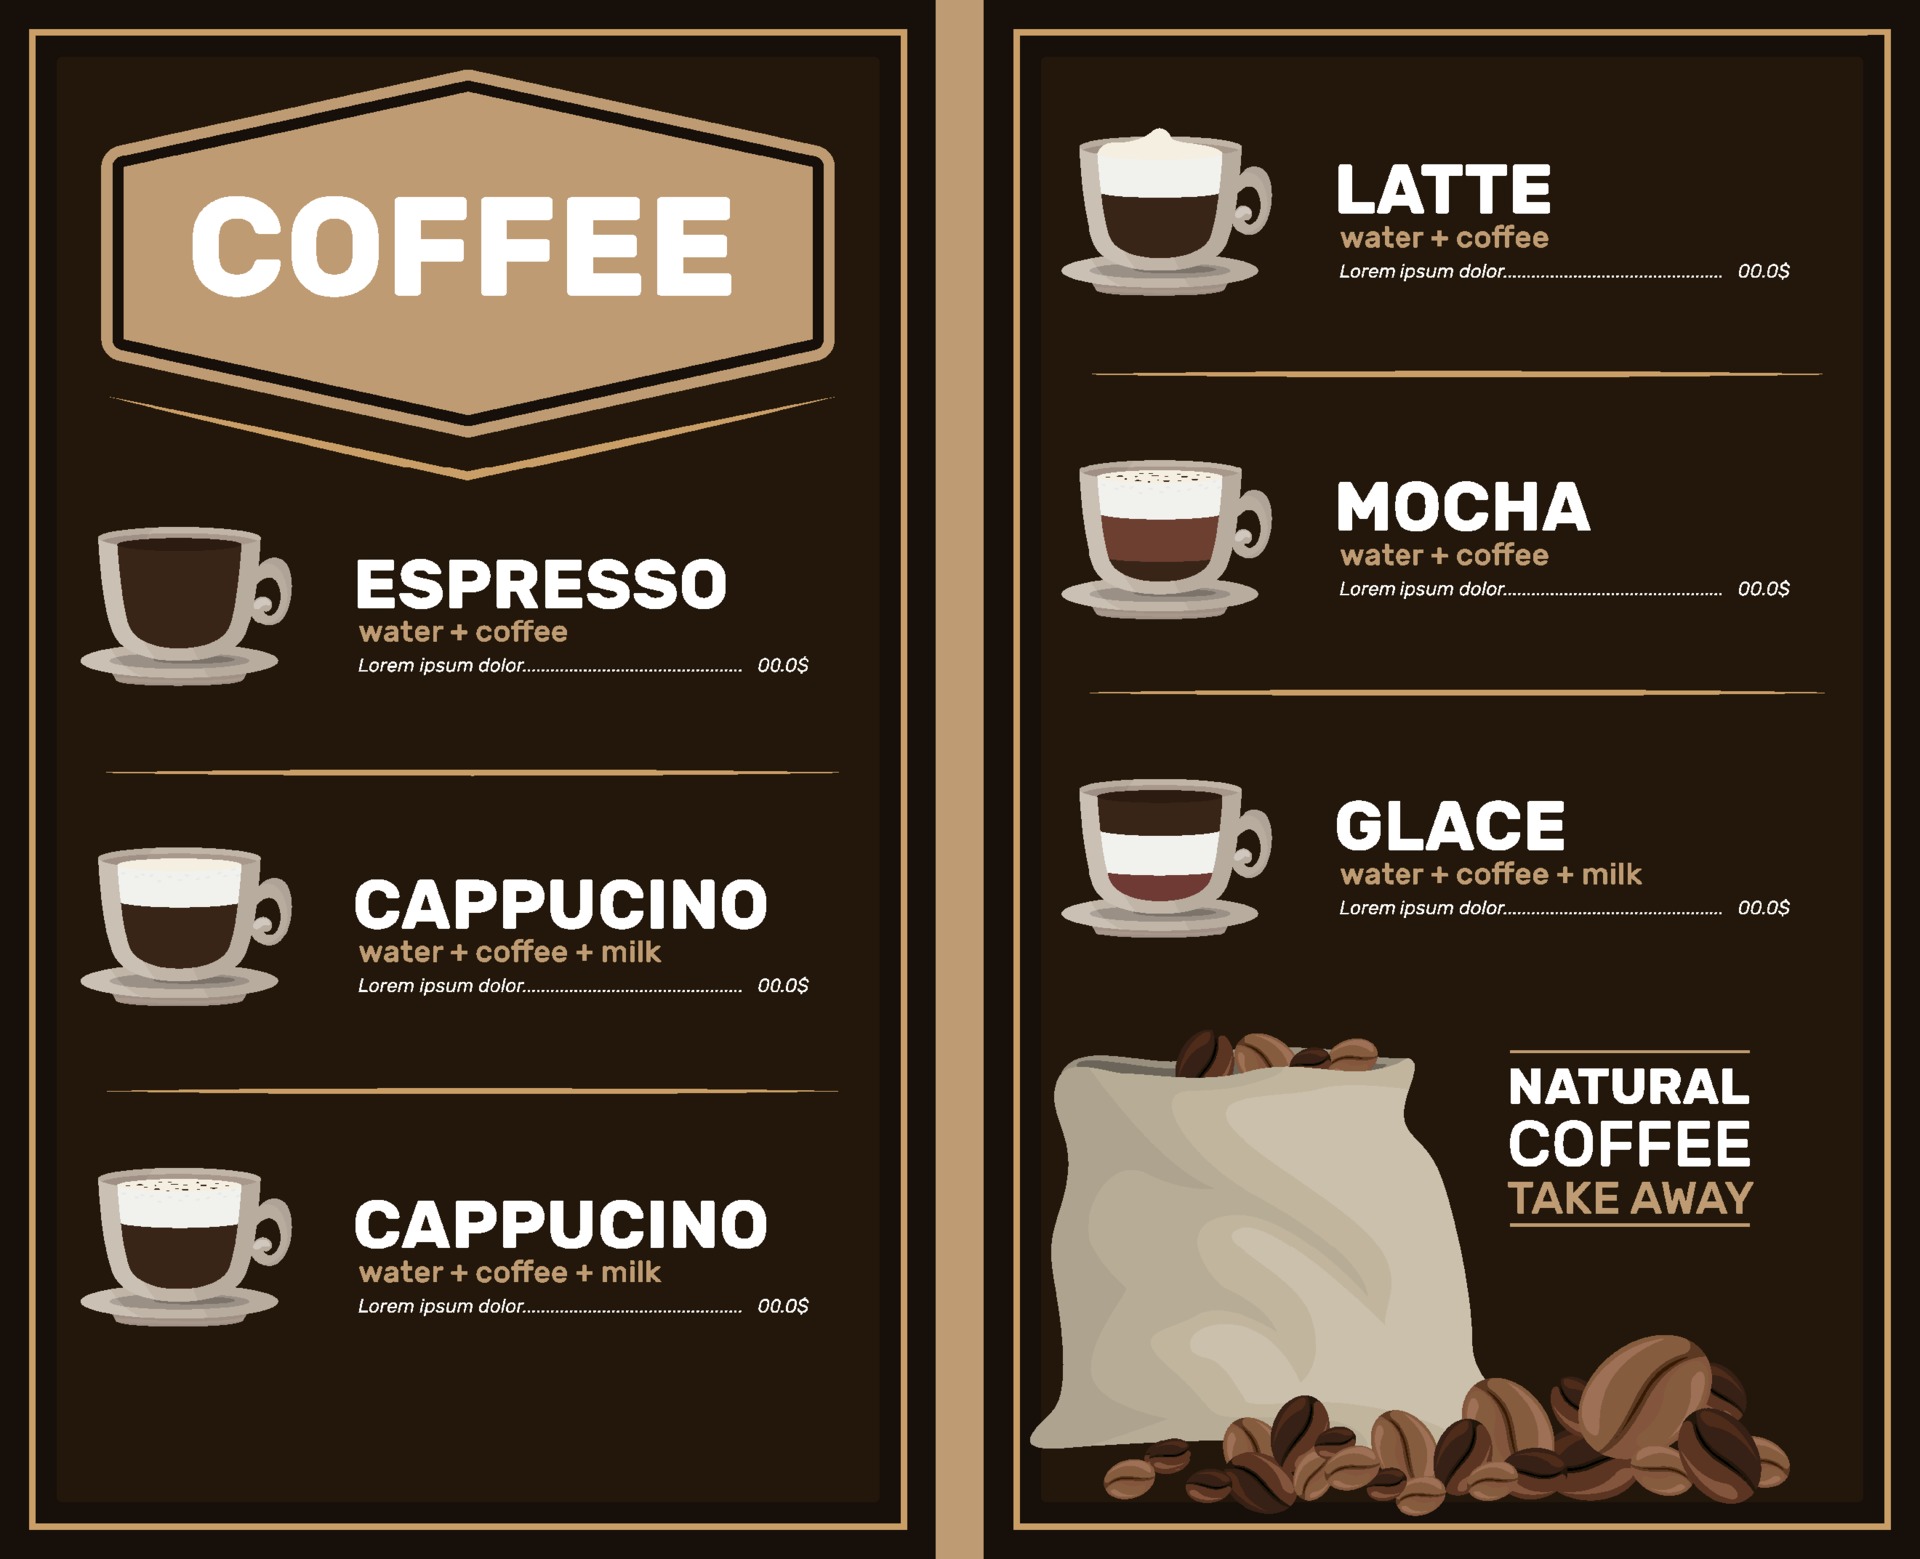 Coffee menu with price list. Types of coffee preparation with cup